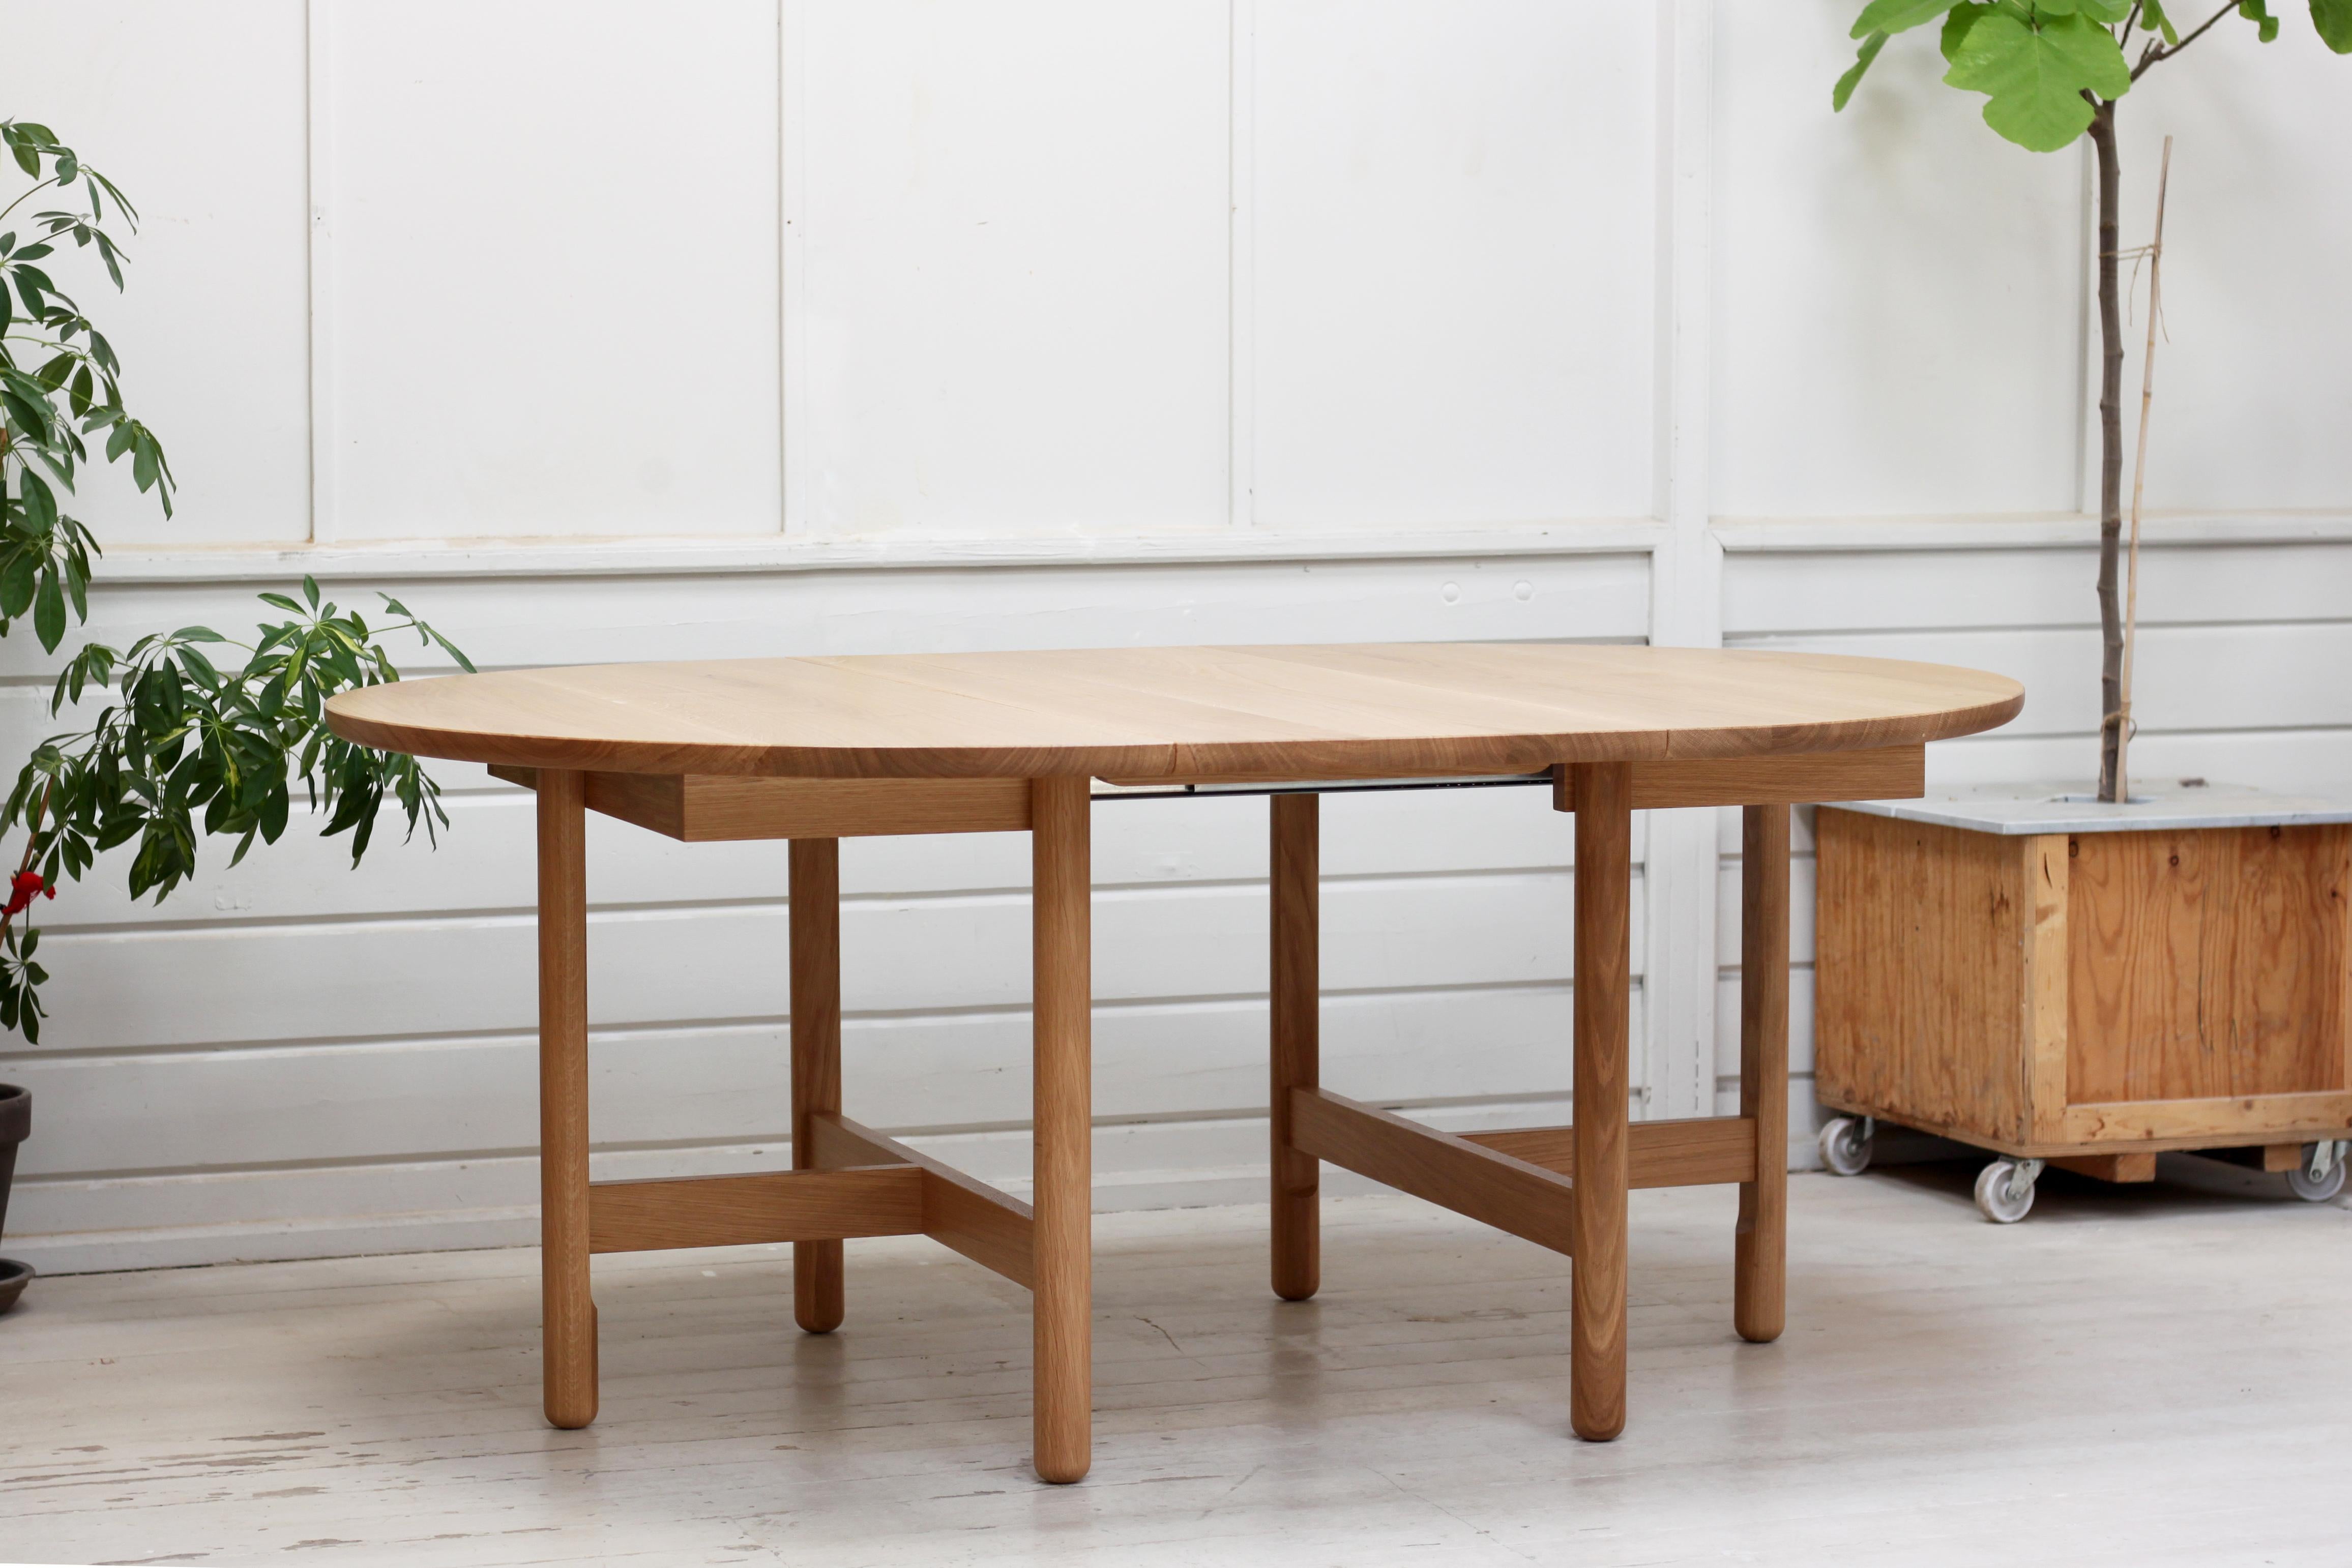 Handmade Thea Dining Table, Extendable Ø130cm - Painted Oak - by BACD studio For Sale 2